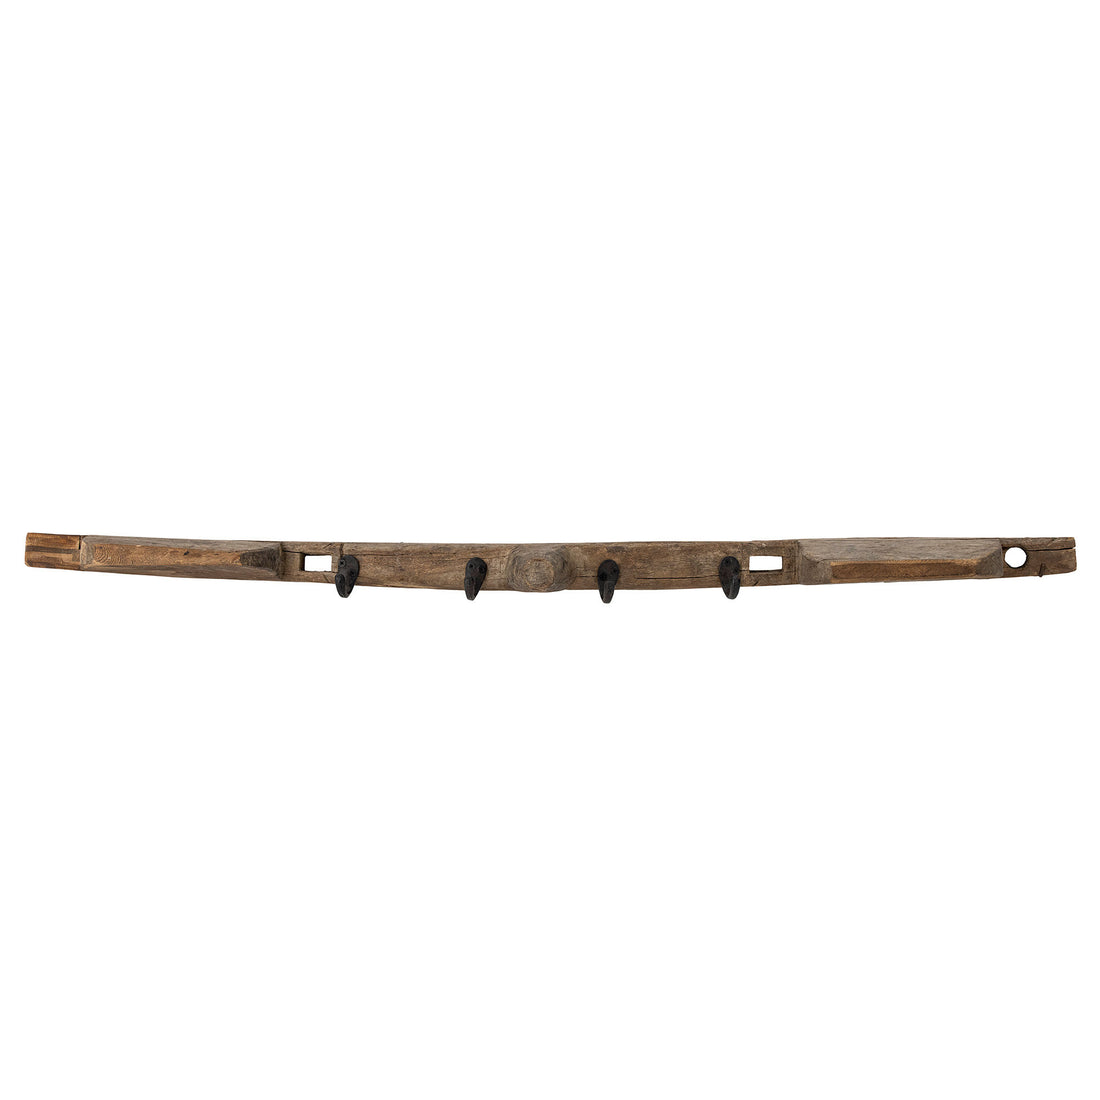 Creative Collection Oddur Coat rack, Brown, Recycled wood